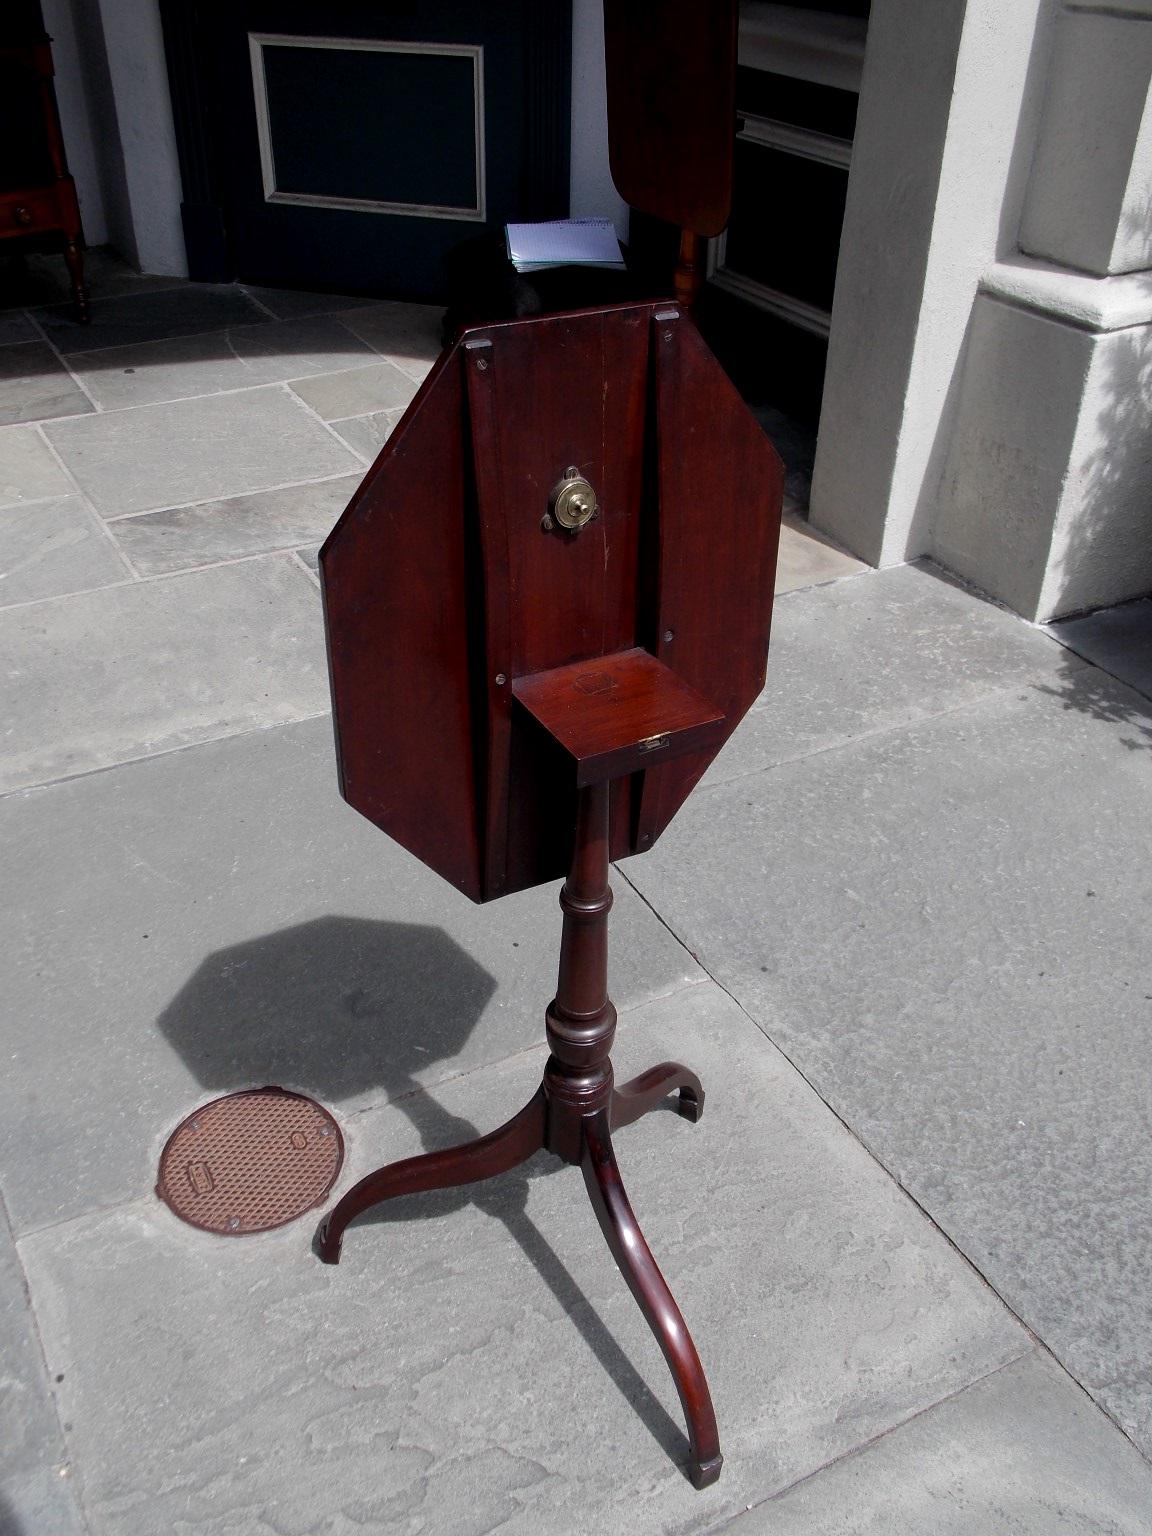  American Hepplewhite Mahogany Star Inlaid Candle Stand on Saber Legs, C. 1790 For Sale 2